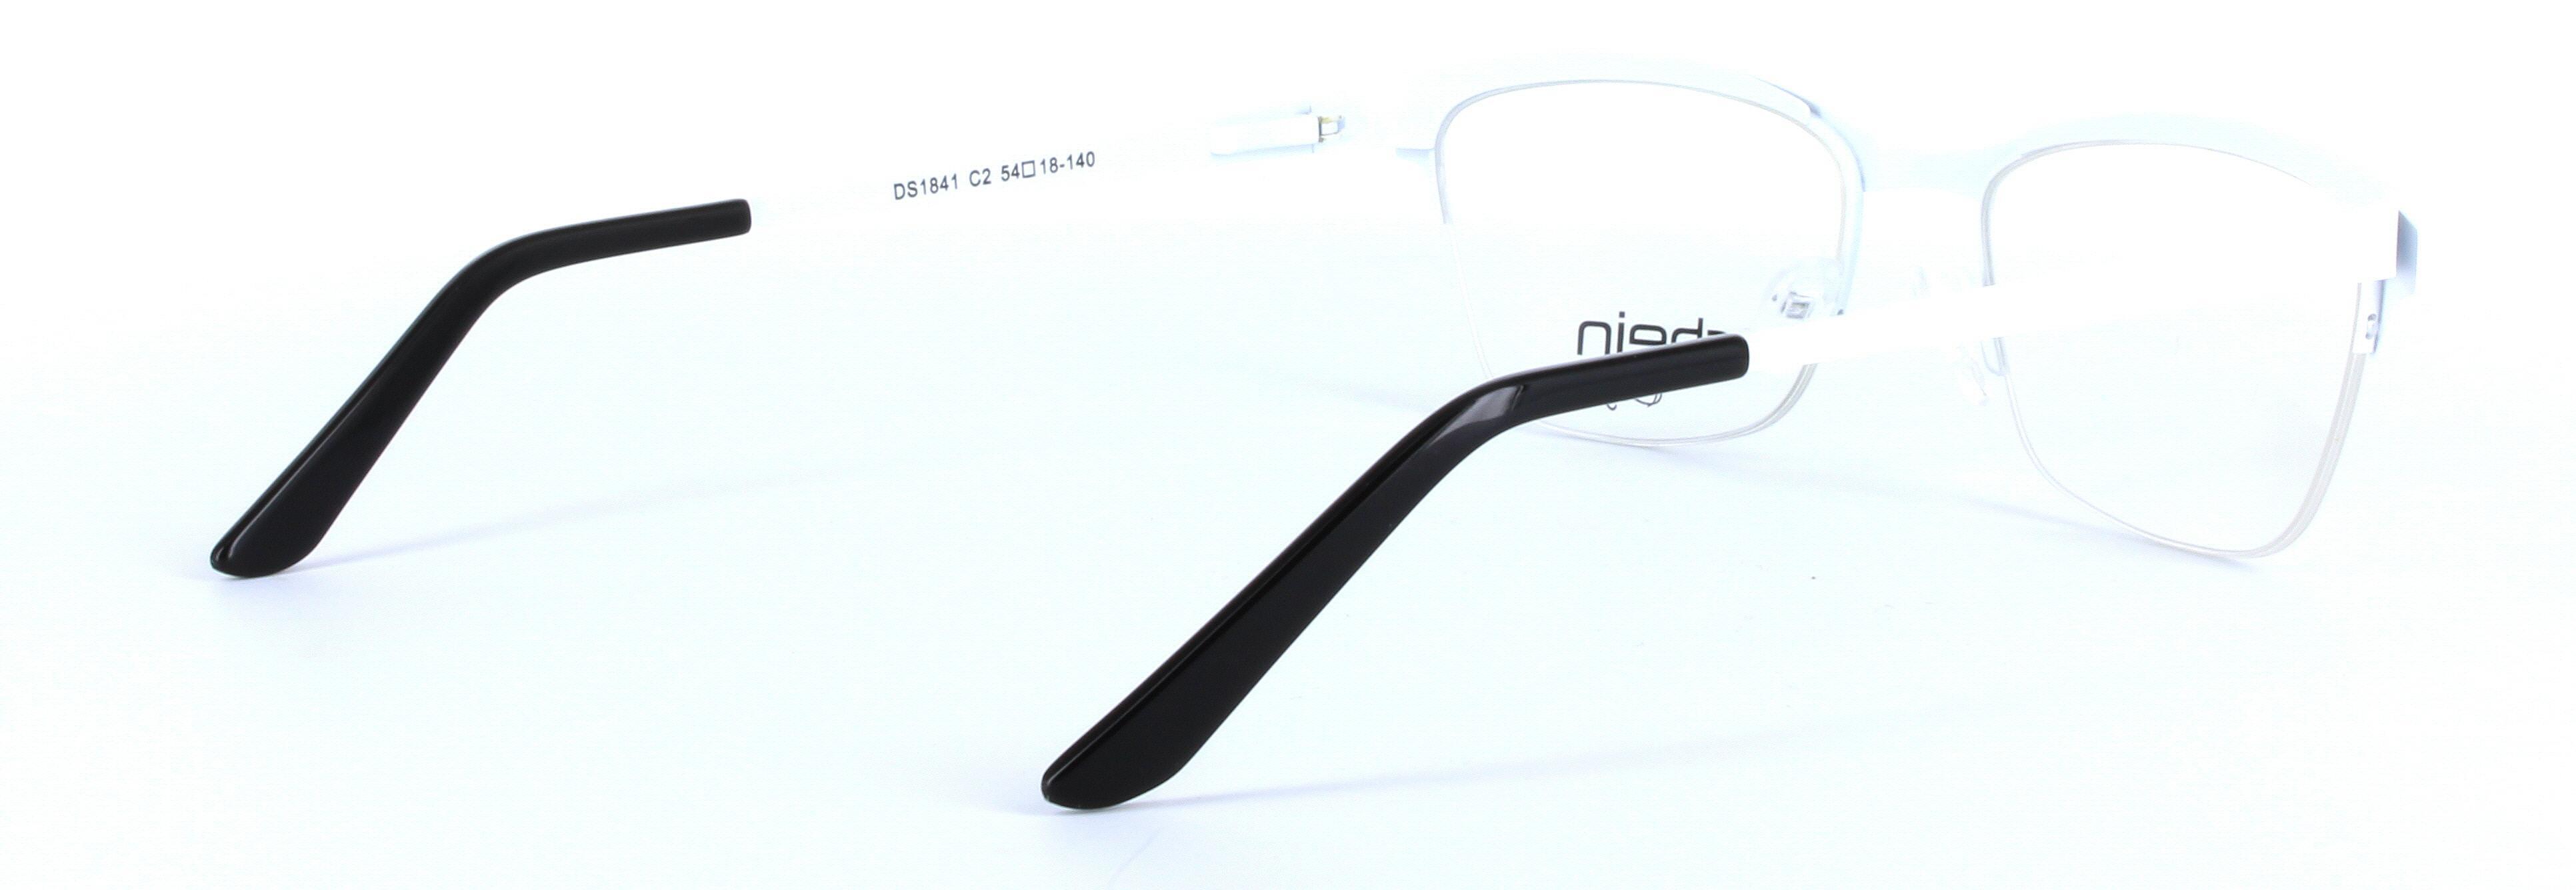 Andrea Black and White Semi Rimless Oval Metal Glasses - Image View 4